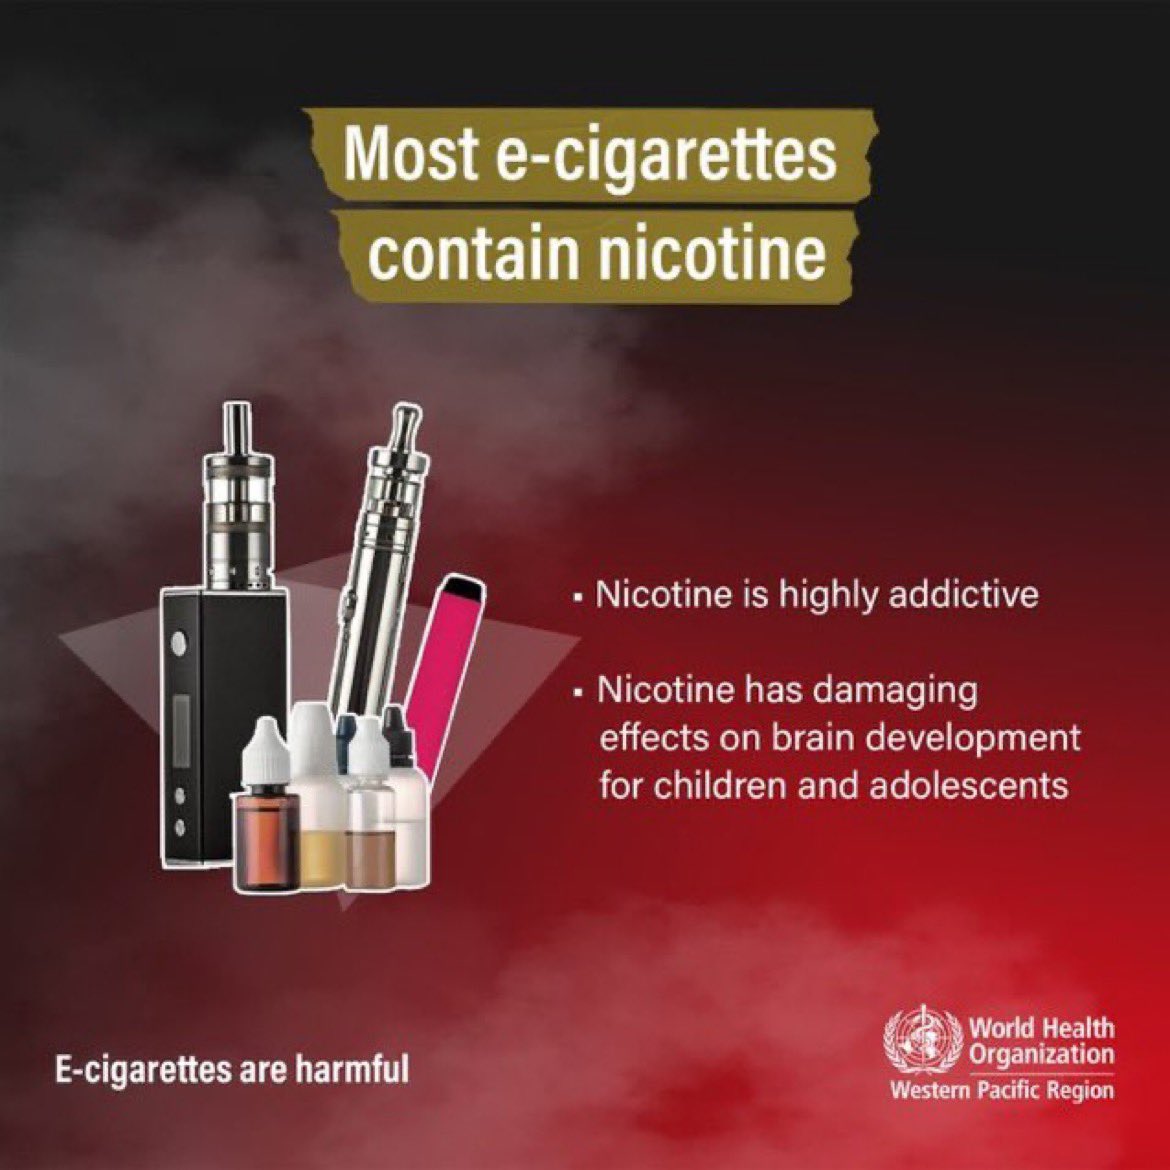 Did you know? Most #ecigarettes contain #nicotine - a highly addictive substance that can harm brain development in kids and teens. Let’s protect our future generations! 🧠✨ @WHO @uicc @AnkaraUni